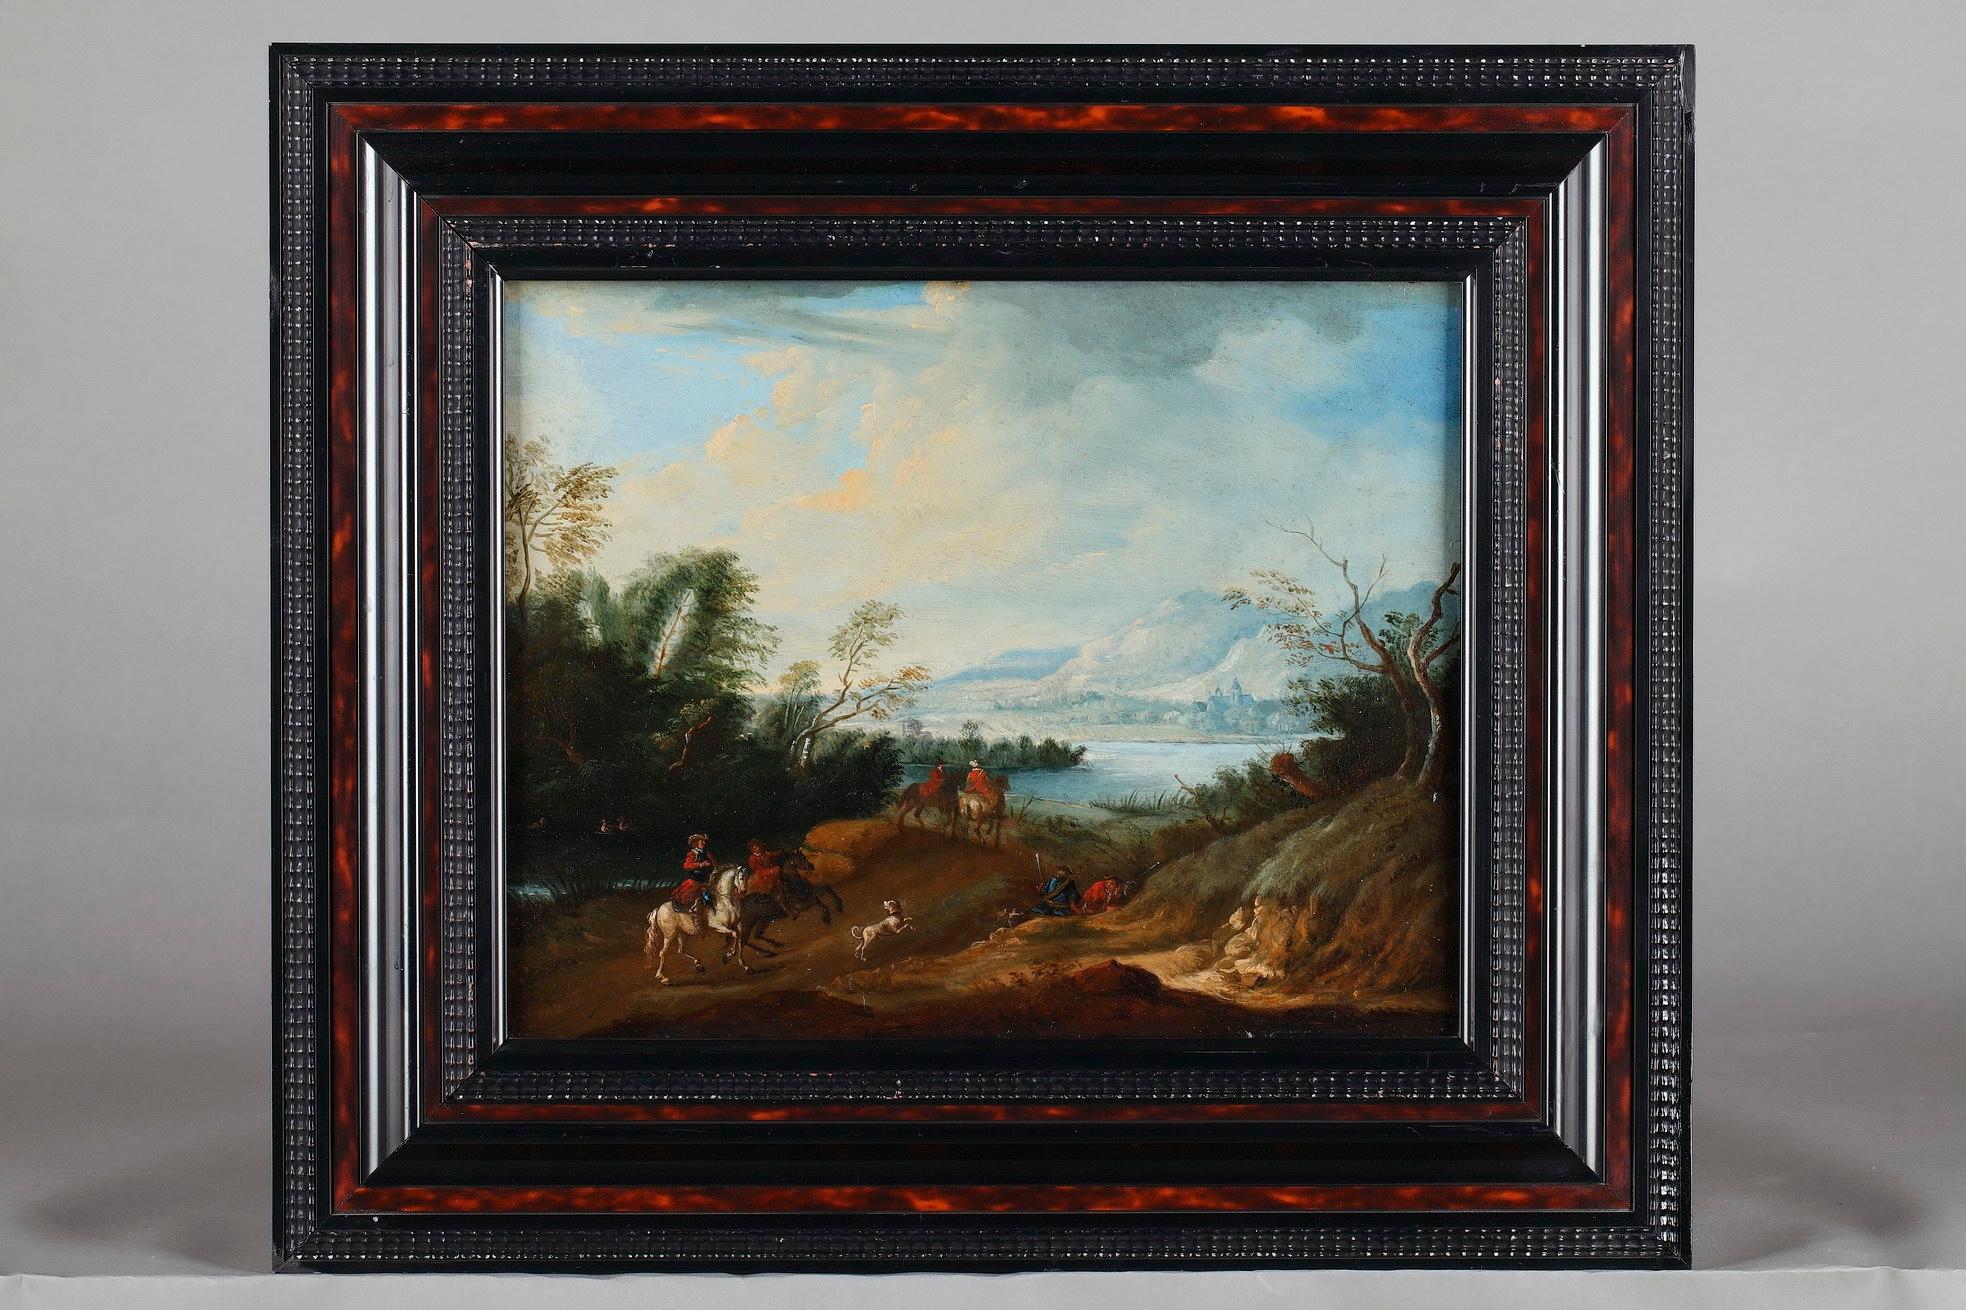 Pair of panels featuring battle scene in a landscape and soldiers in a landscape. The two scenes have a similar composition, with a foreground framed by trees and animated with figures, and a background with lake and mountains.

These panels are